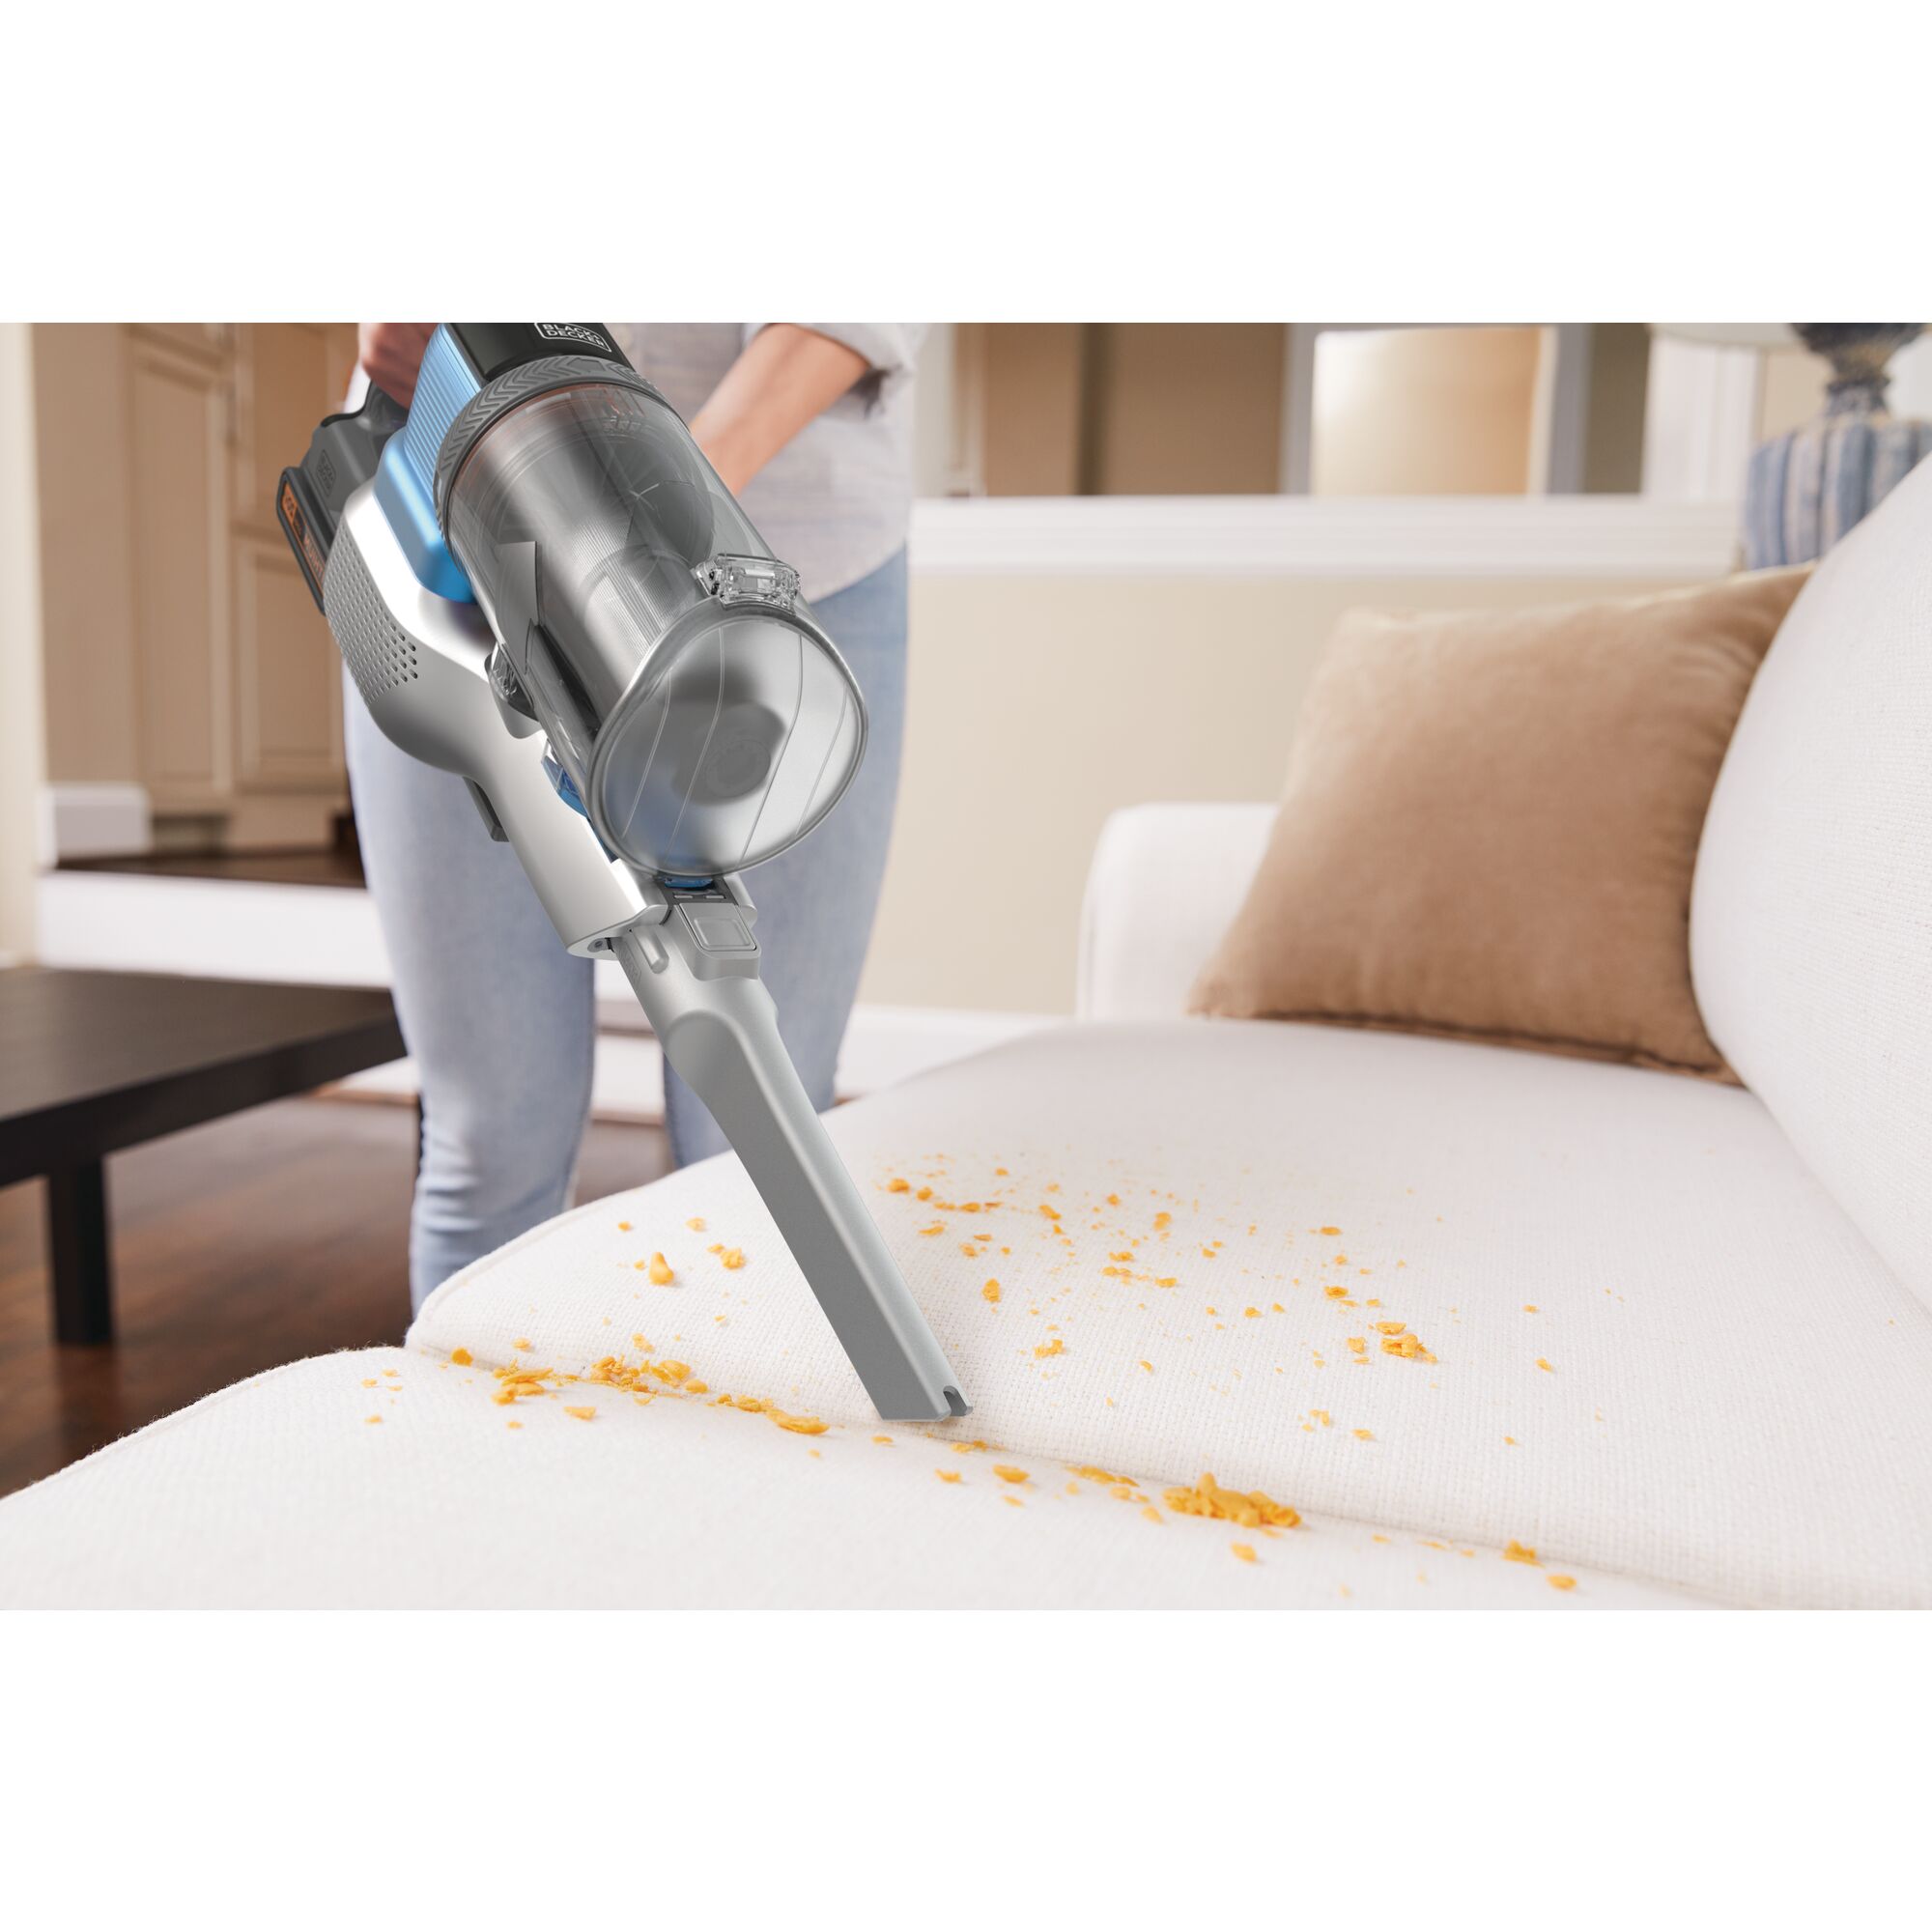 POWER SERIES Extreme Cordless Stick Vacuum Cleaner beings used on sofa.